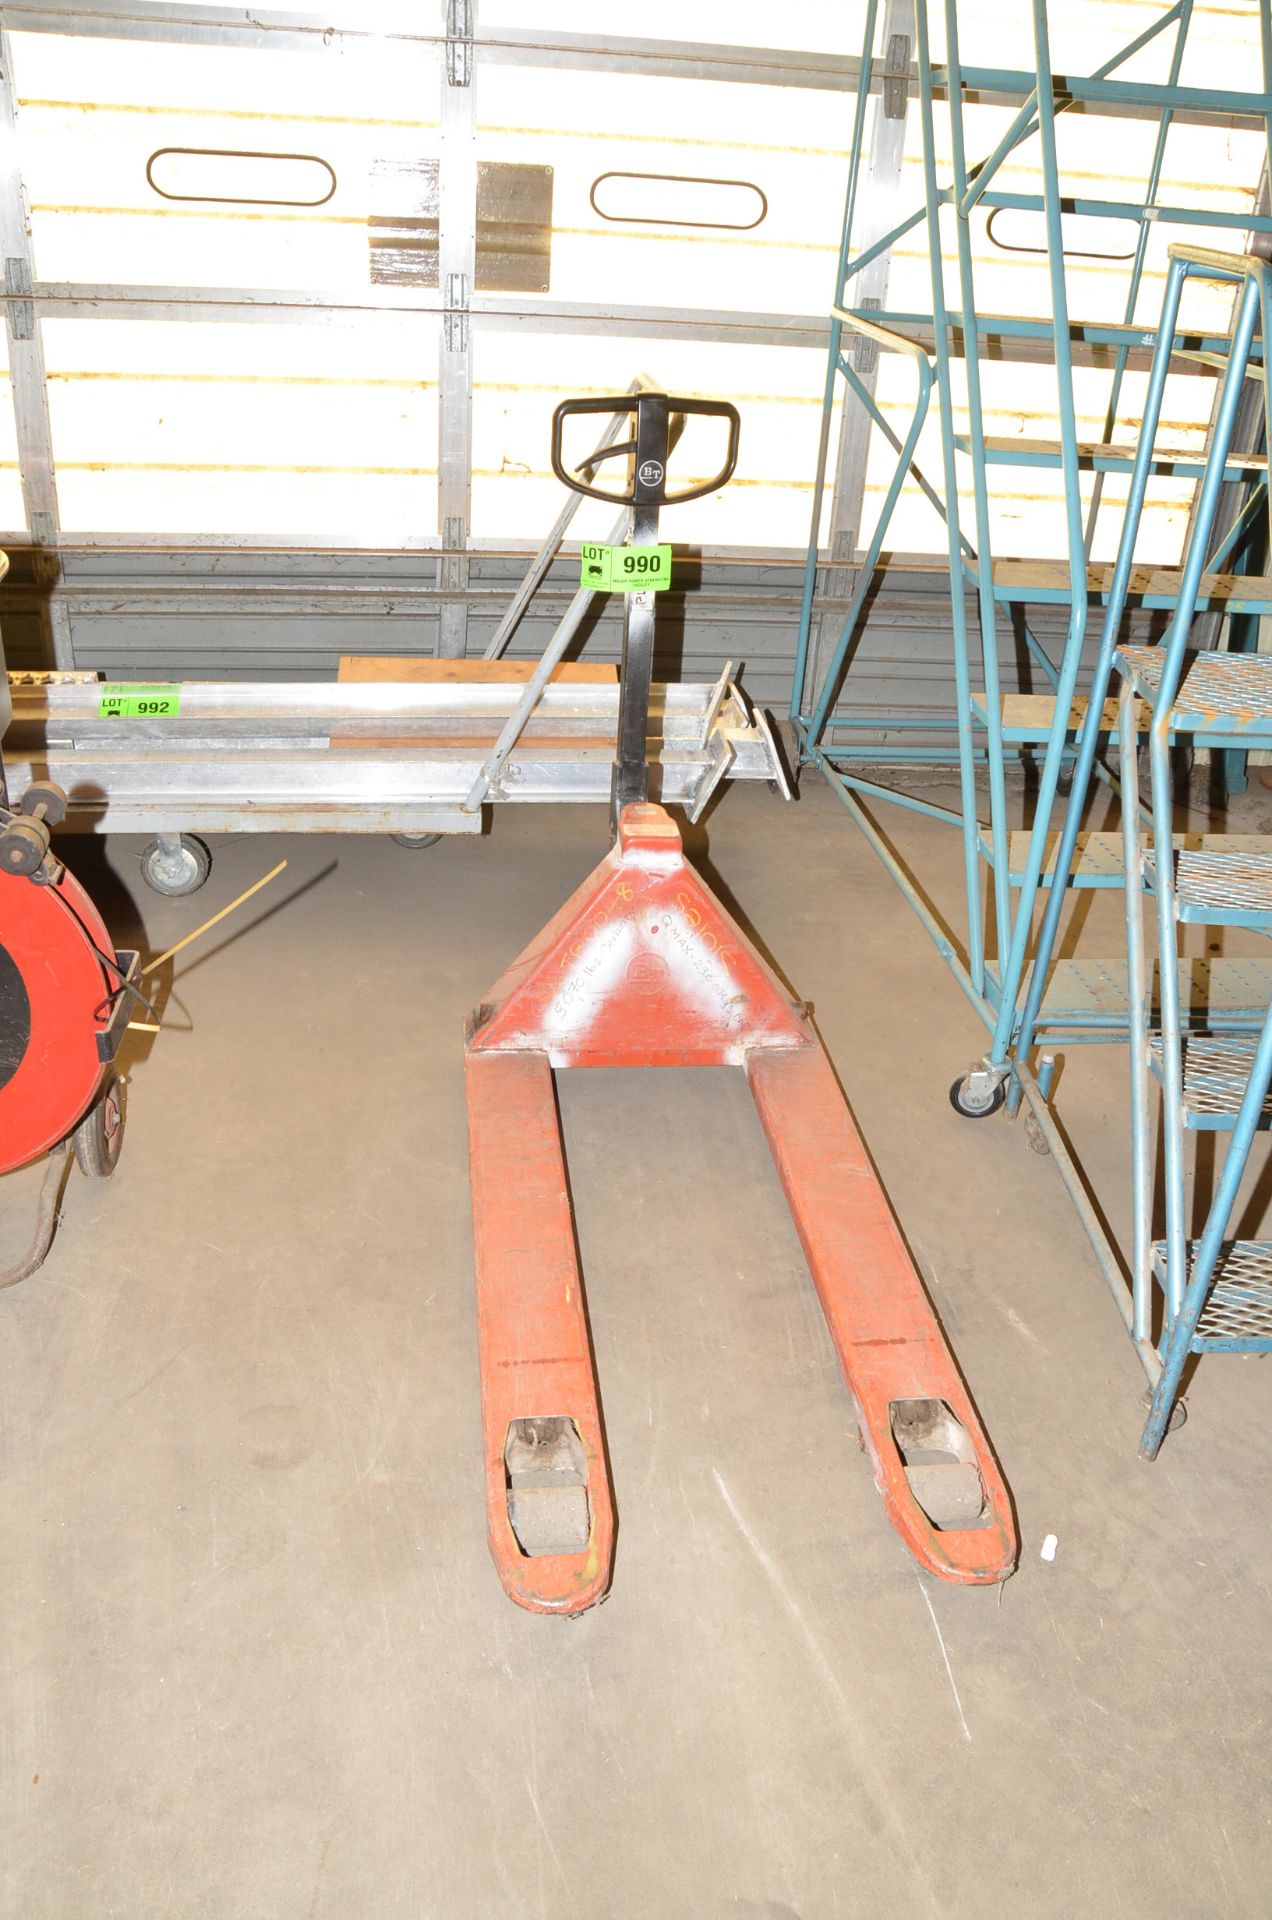 HYDRAULIC PALLET JACK [RIGGING FEE FOR LOT #990 - $25 USD PLUS APPLICABLE TAXES]